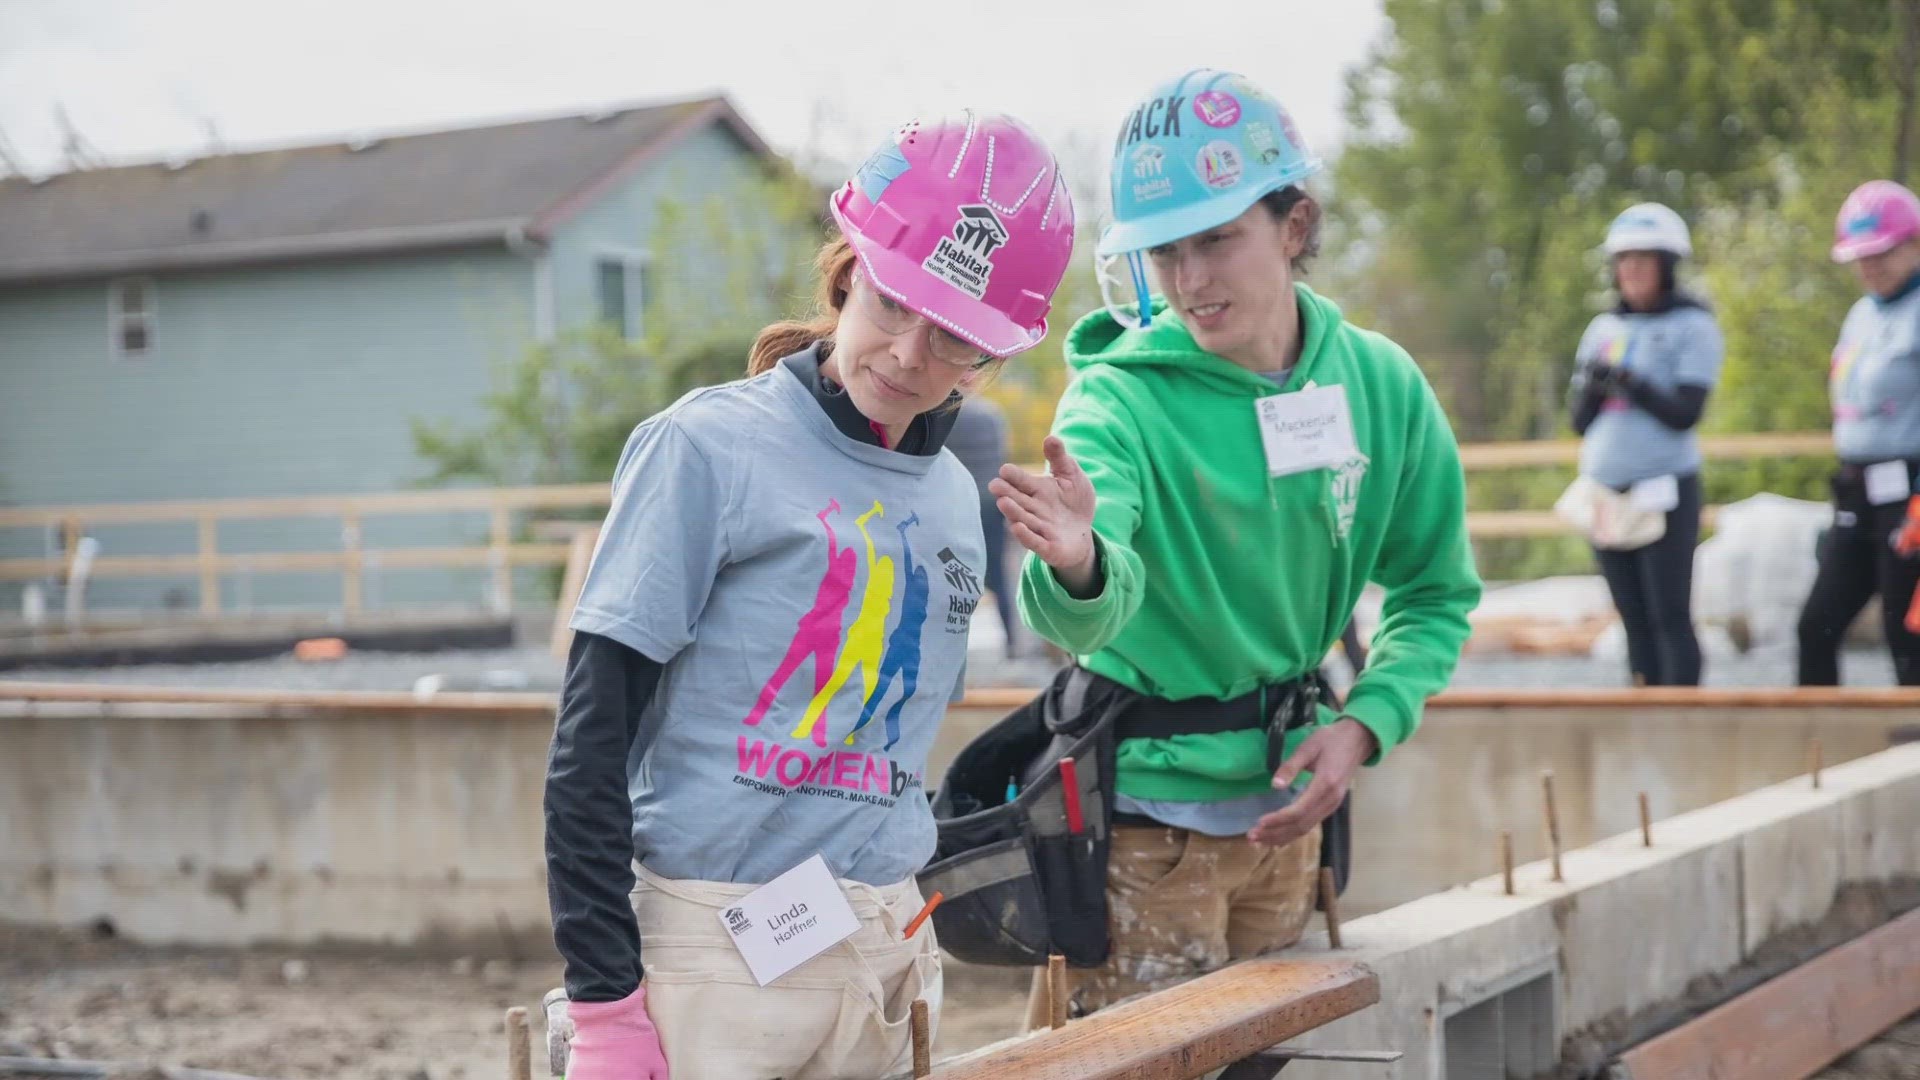 Habitat for Humanity's mission of Women Build is to engage women in the effort to provide safe and decent homes for families in need of affordable housing.